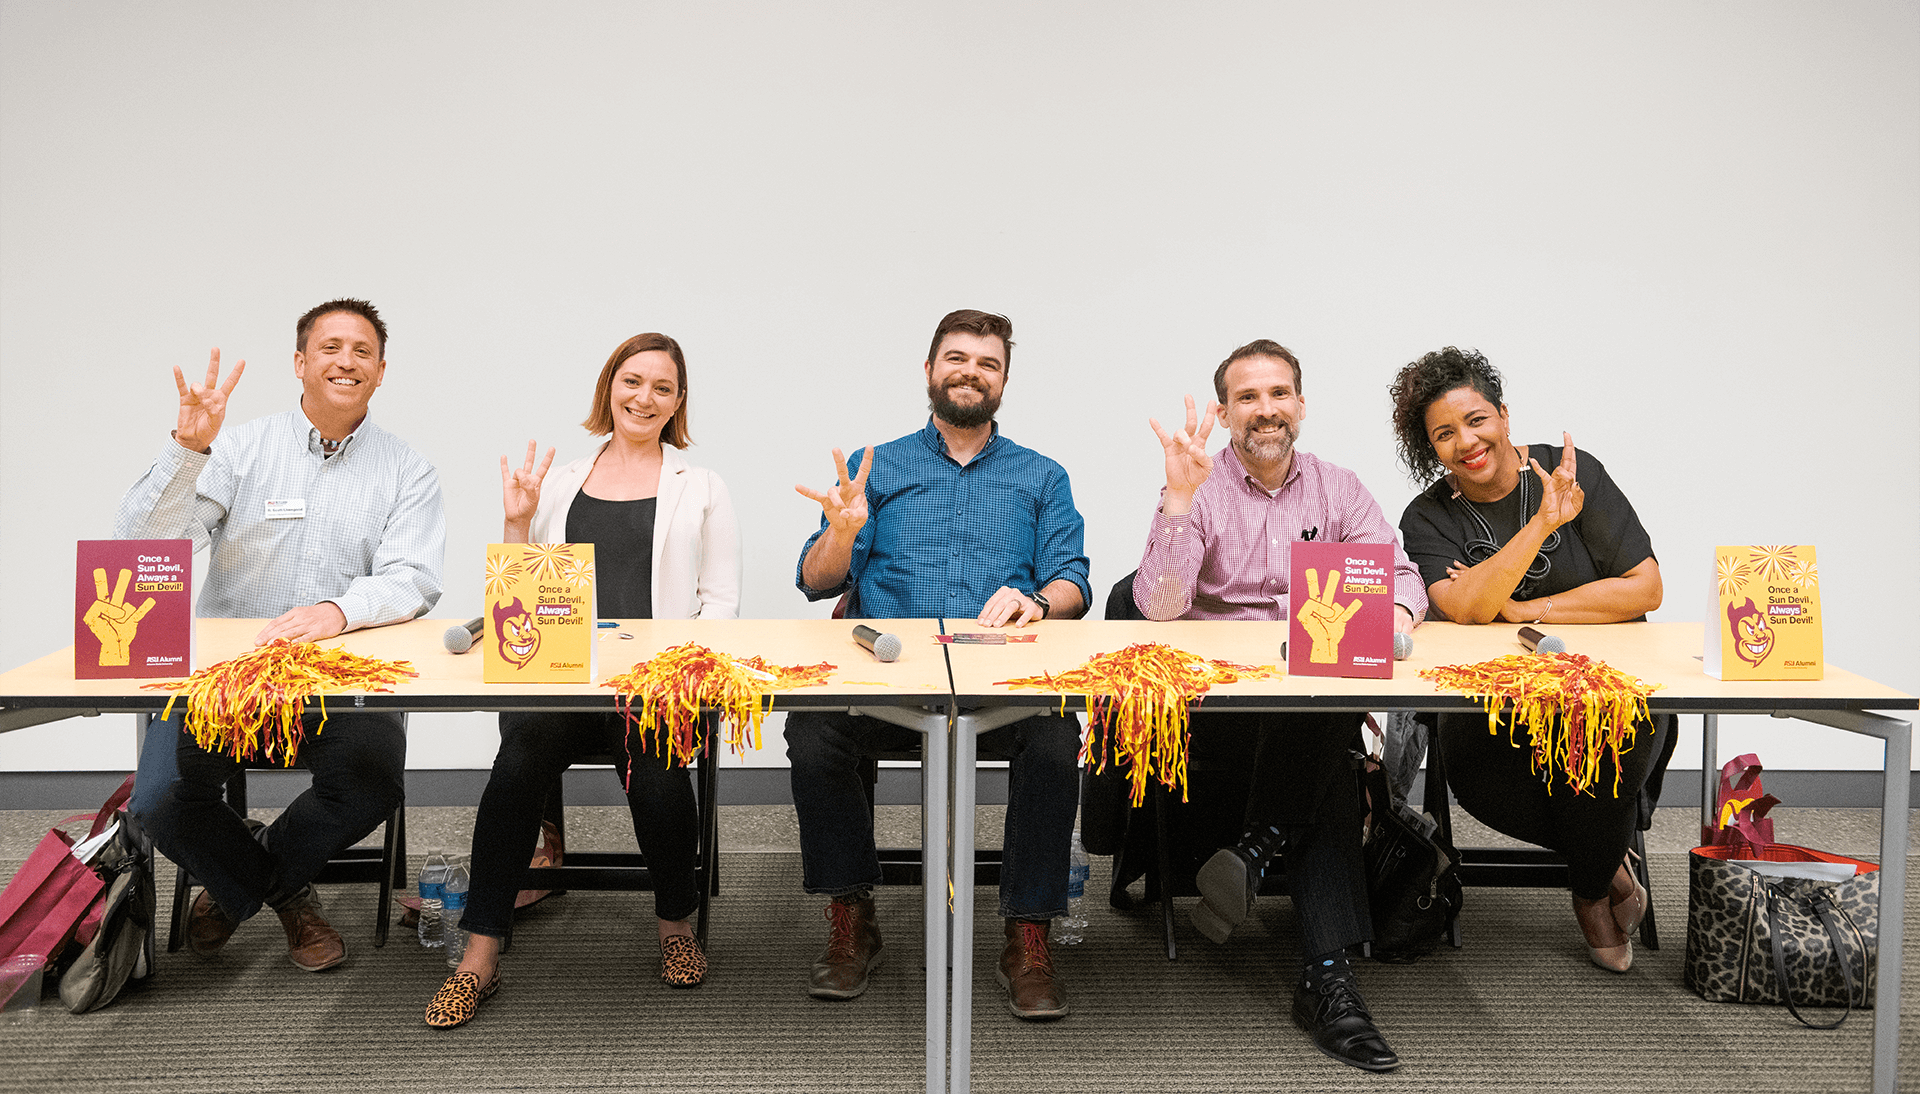 A photograph of five ASU alumni seated panel-style across a long table, holding their hands up with the ASU pitchfork symbol. Signs on the table read "Once a sun devil, always a sun devil."